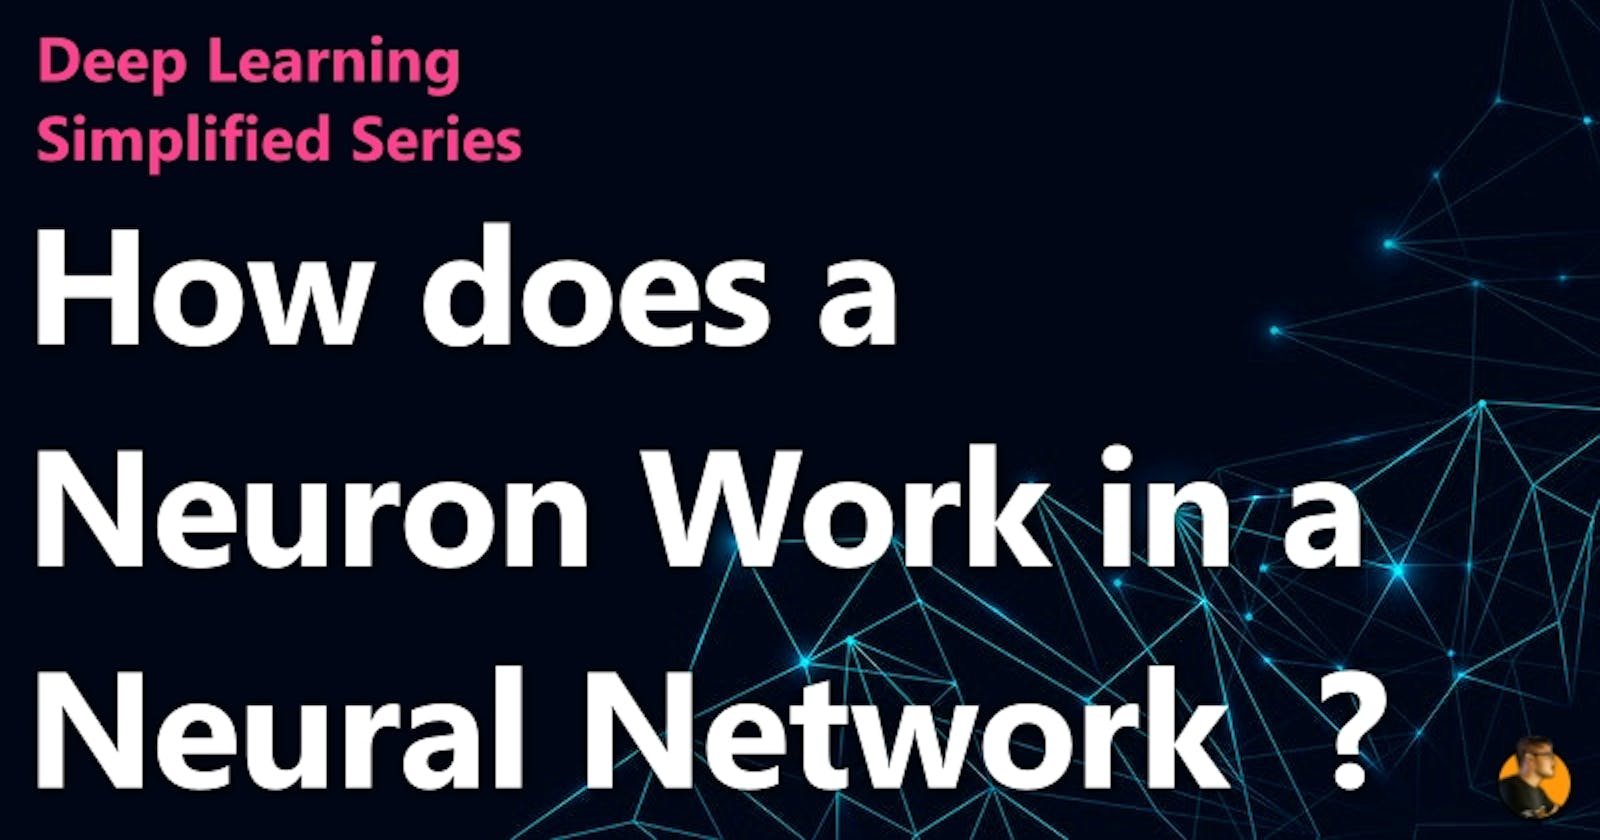 How does a Neuron Work in a Neural Network  ? - Deep Learning Simplified Series